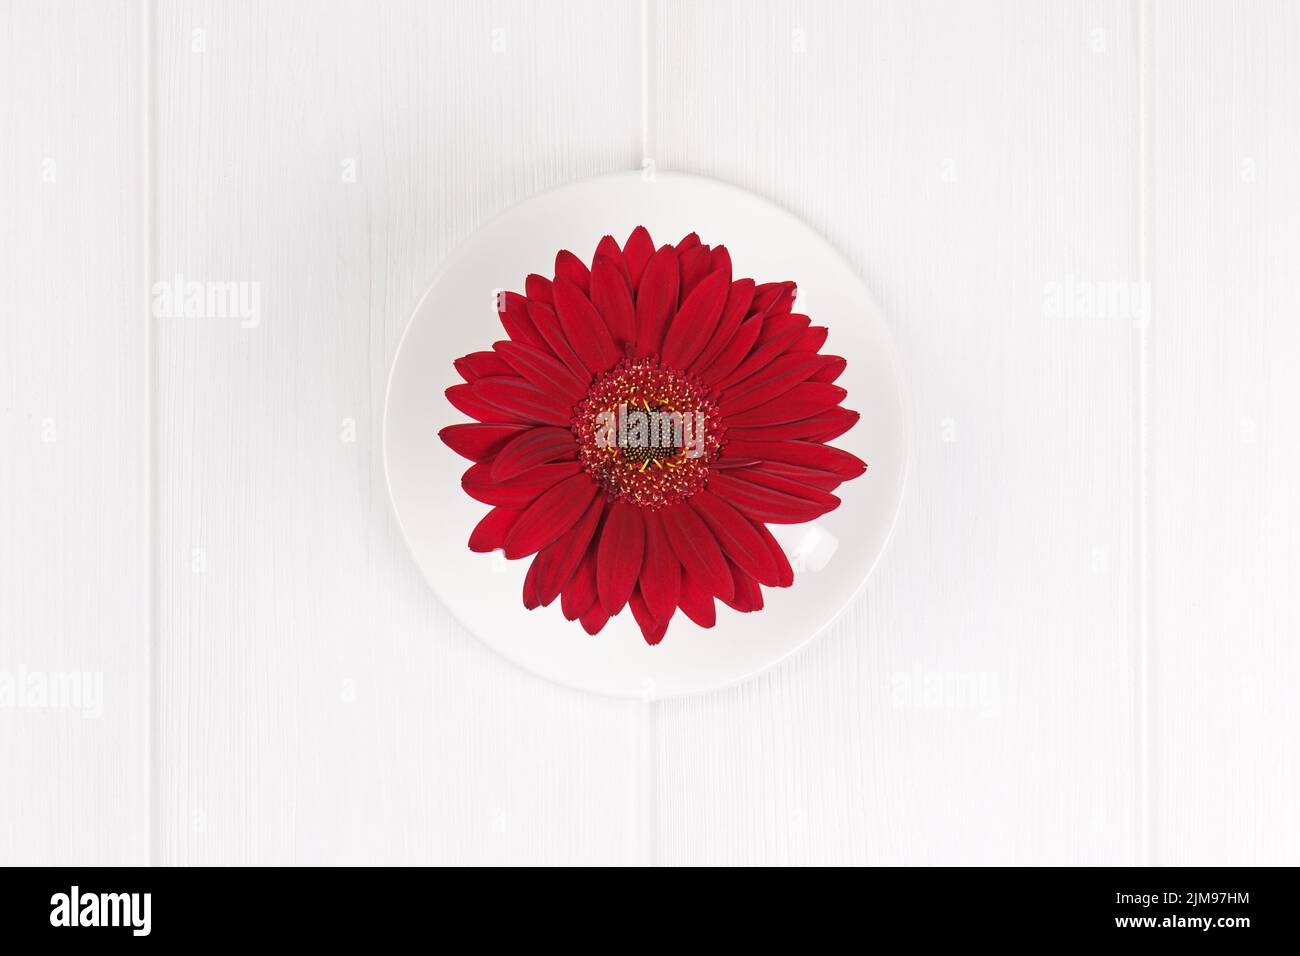 Red gerbera flower in cup and sauce on white wooden  background. Stock Photo